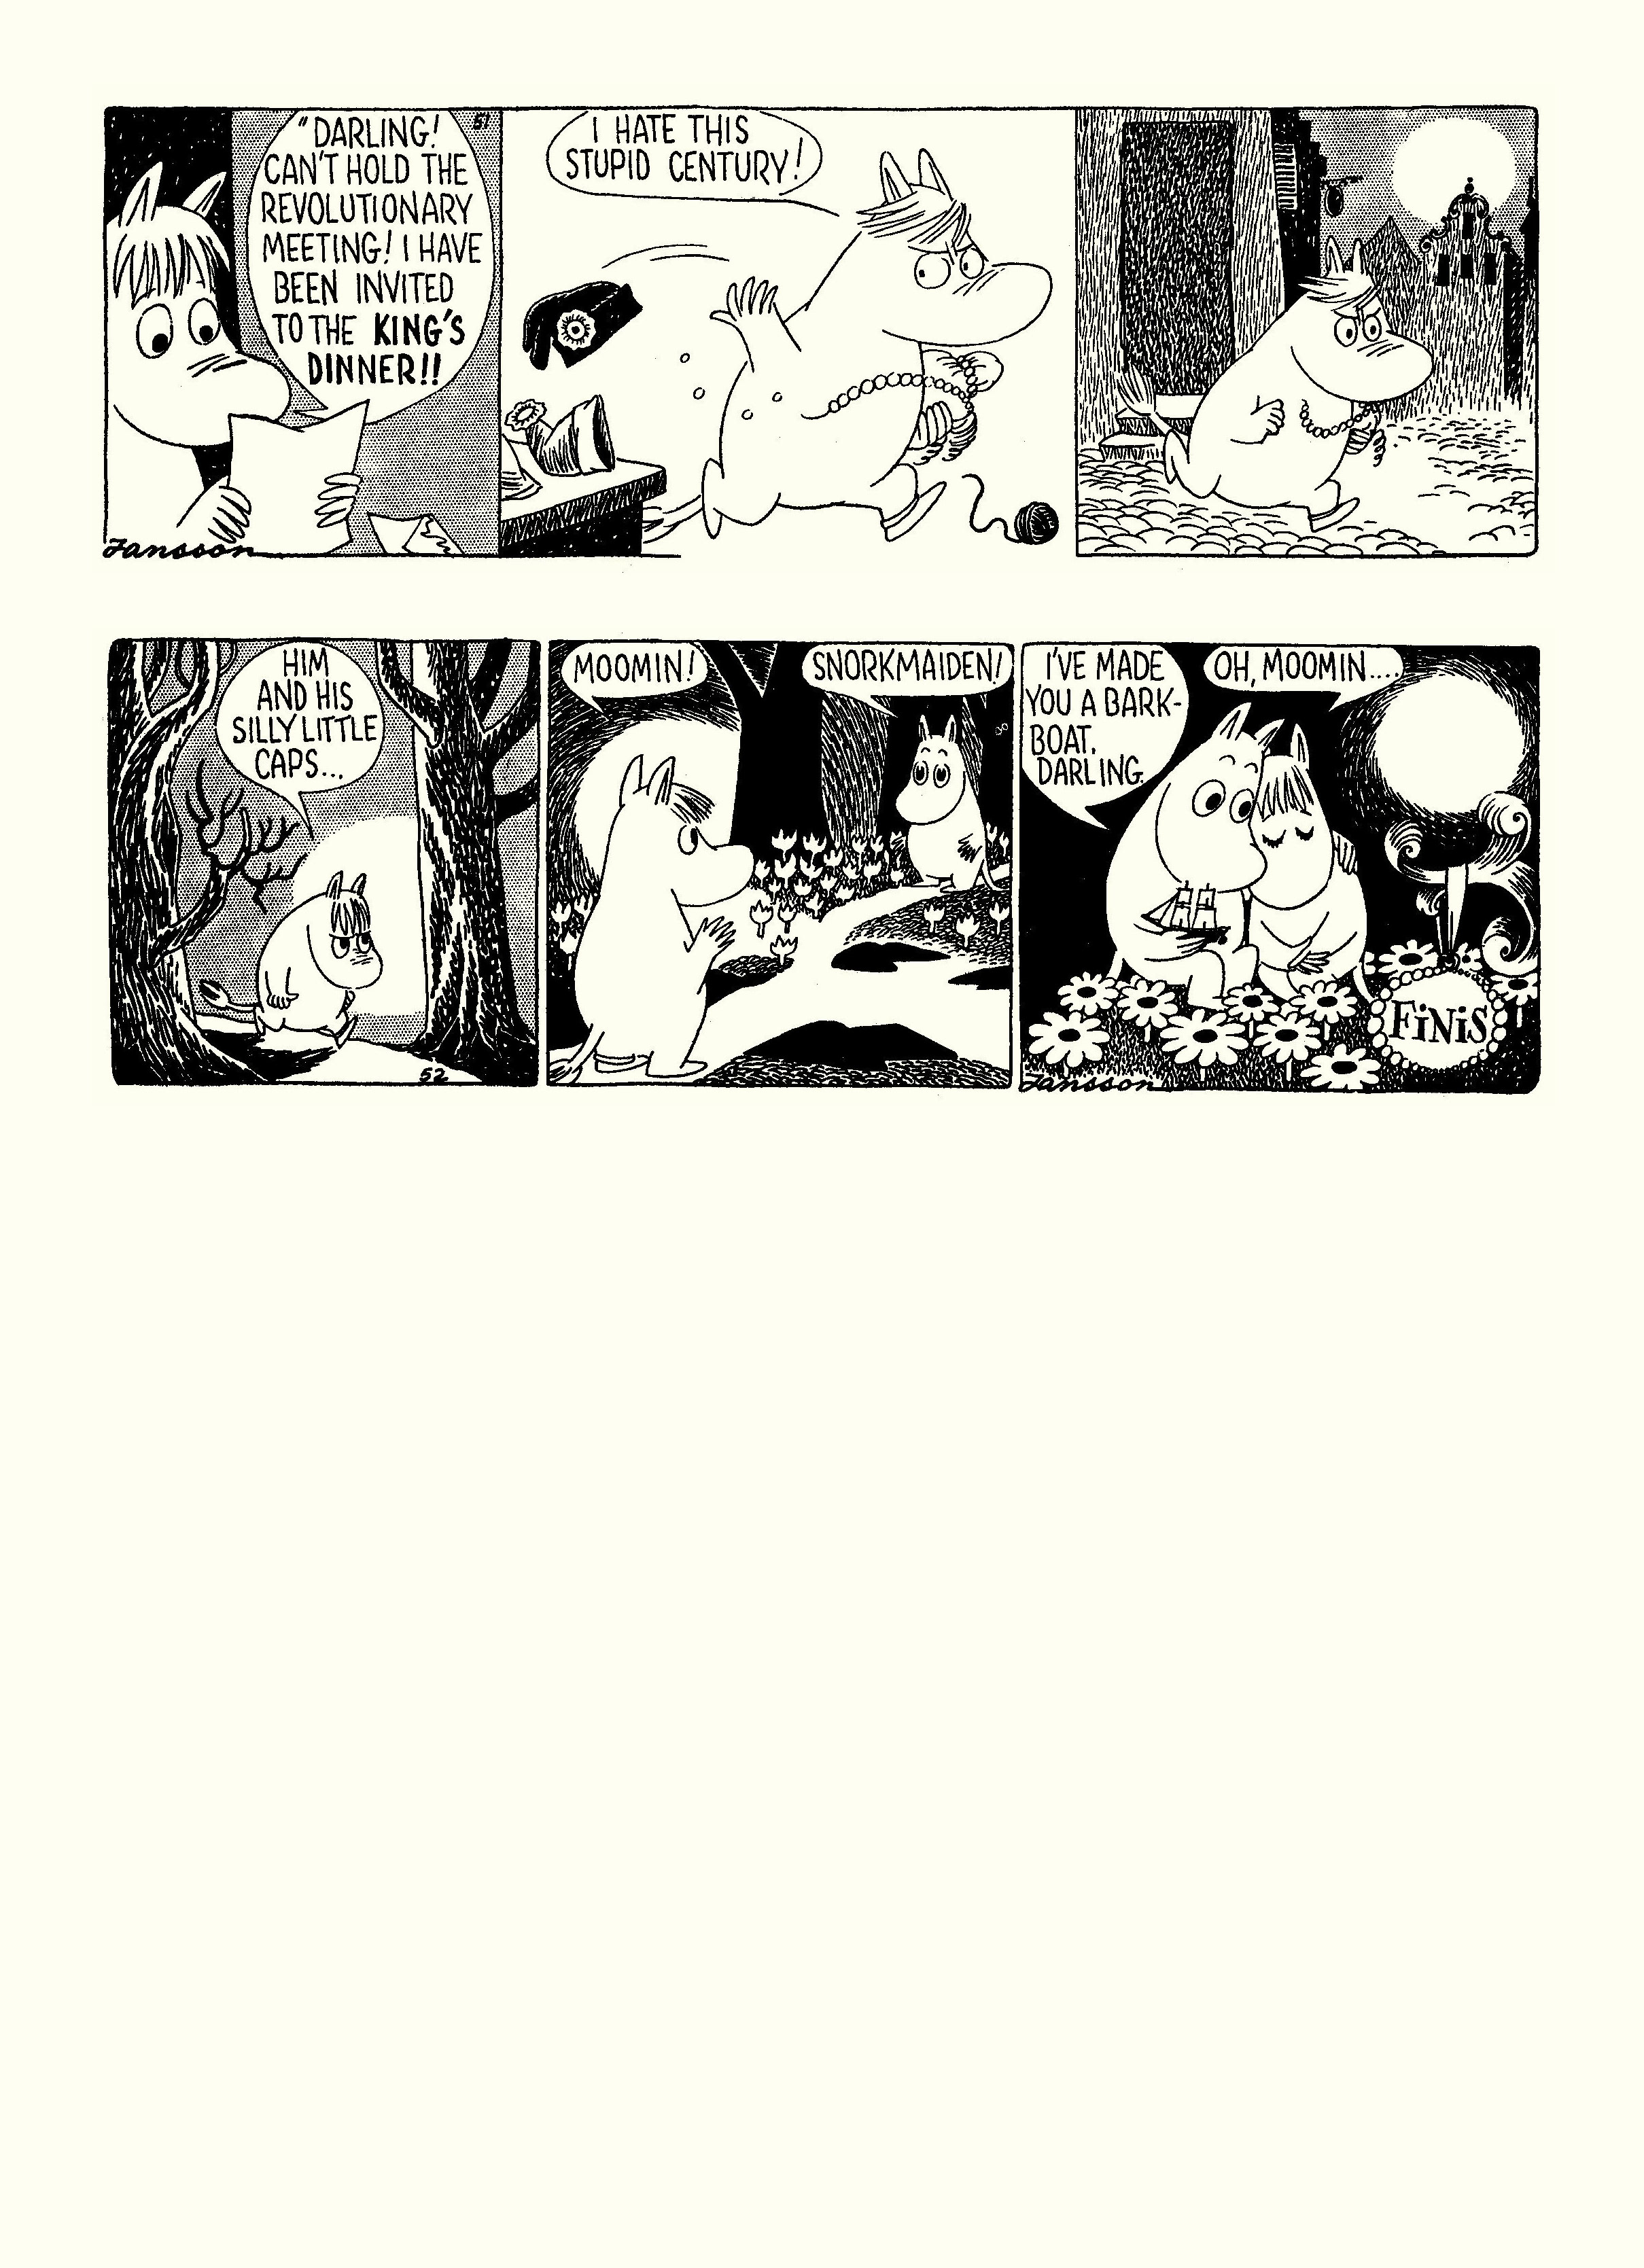 Read online Moomin: The Complete Tove Jansson Comic Strip comic -  Issue # TPB 4 - 36